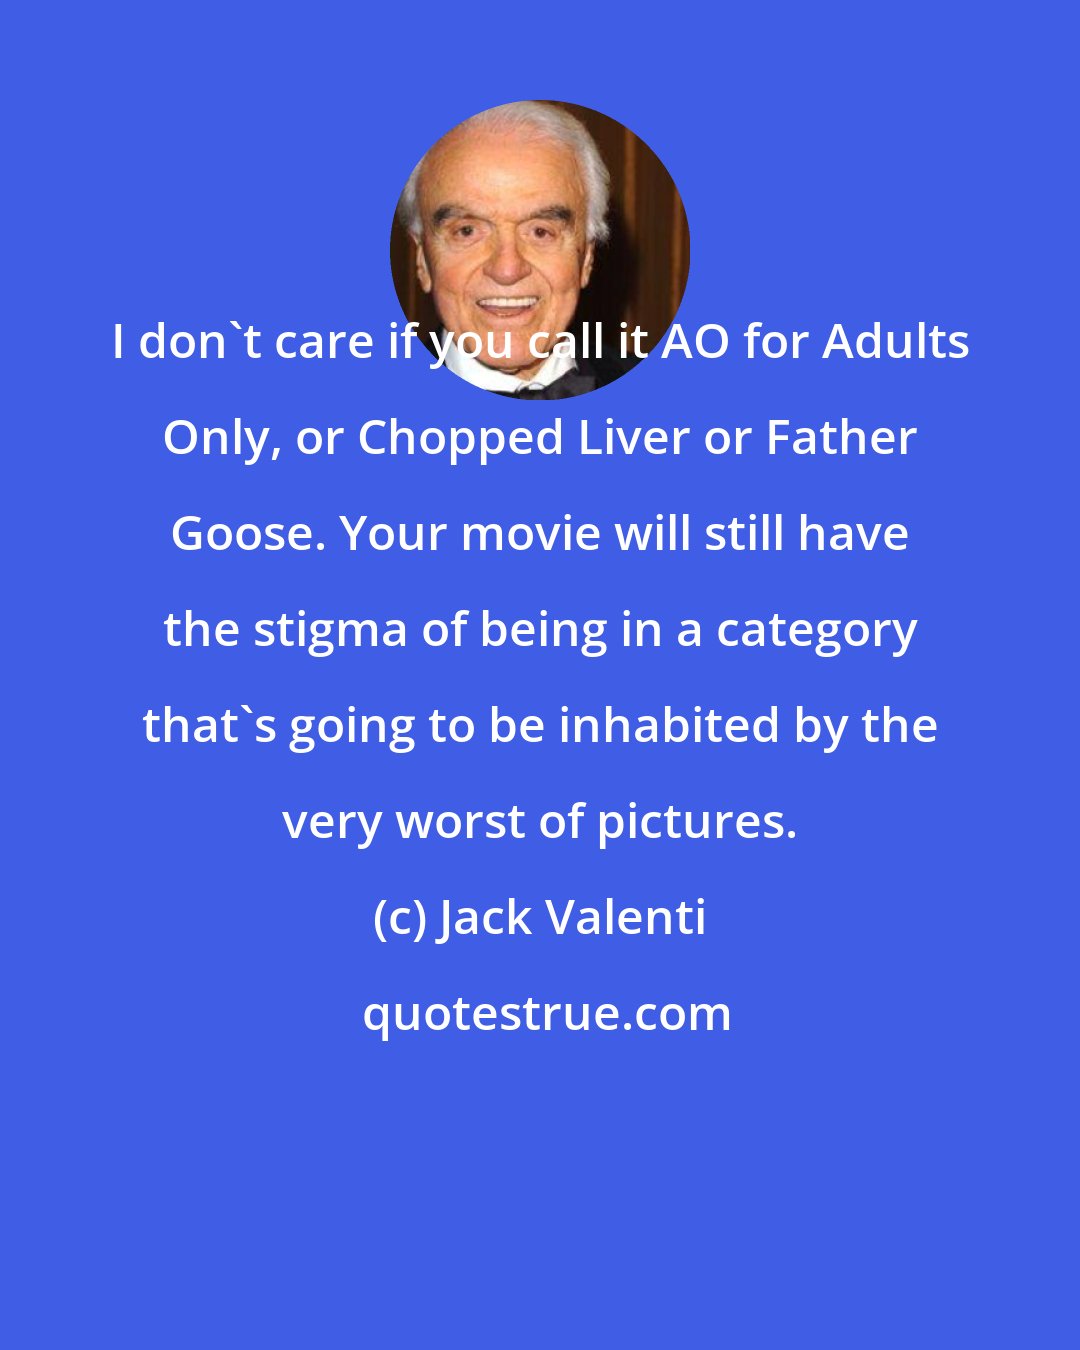 Jack Valenti: I don't care if you call it AO for Adults Only, or Chopped Liver or Father Goose. Your movie will still have the stigma of being in a category that's going to be inhabited by the very worst of pictures.